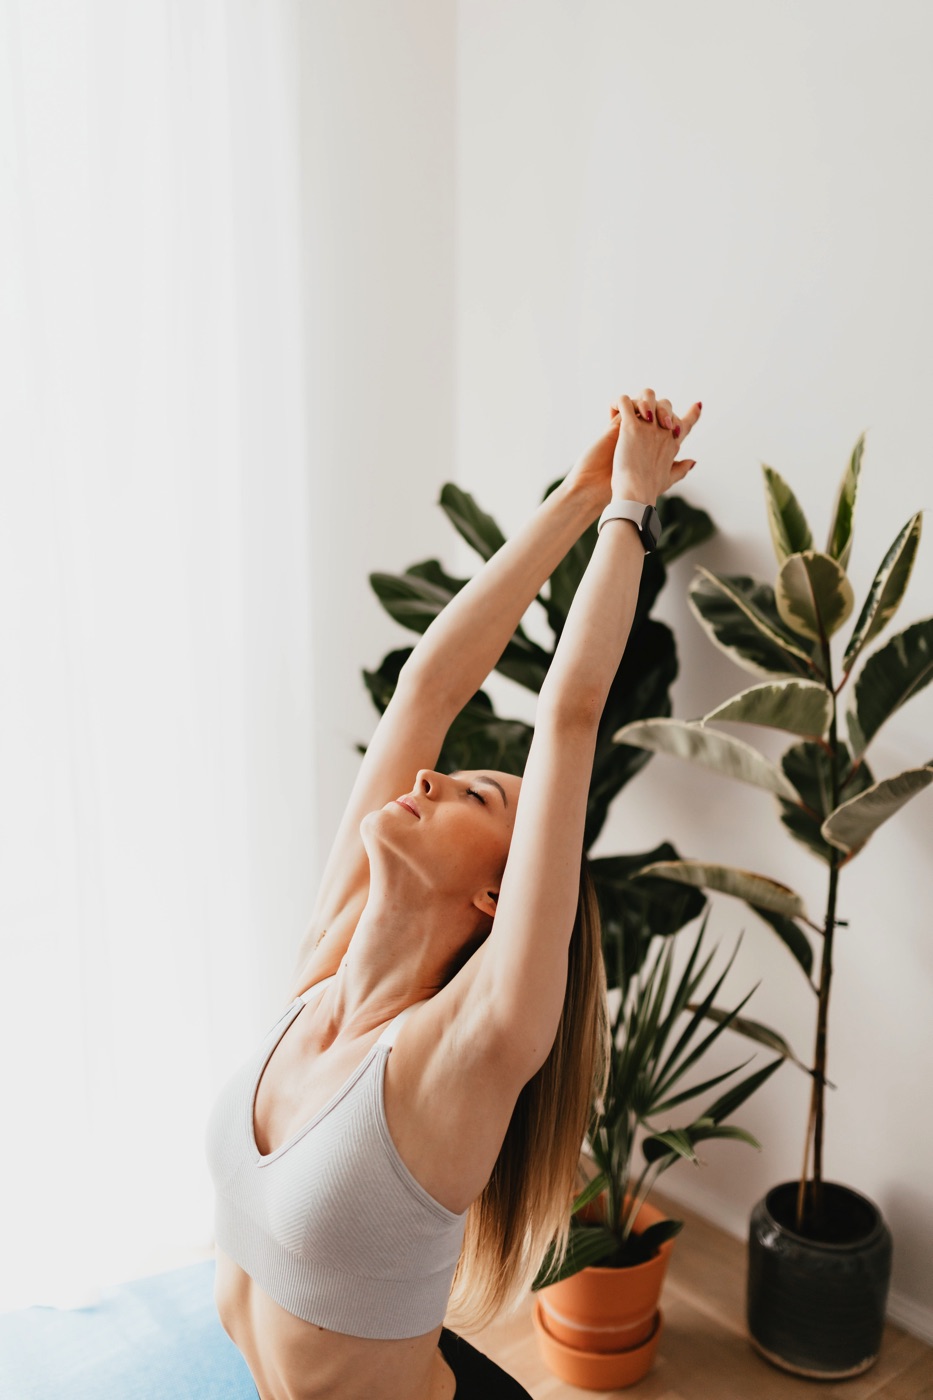 Photo of a person doing yoga stretches in their house, in front of two plants.